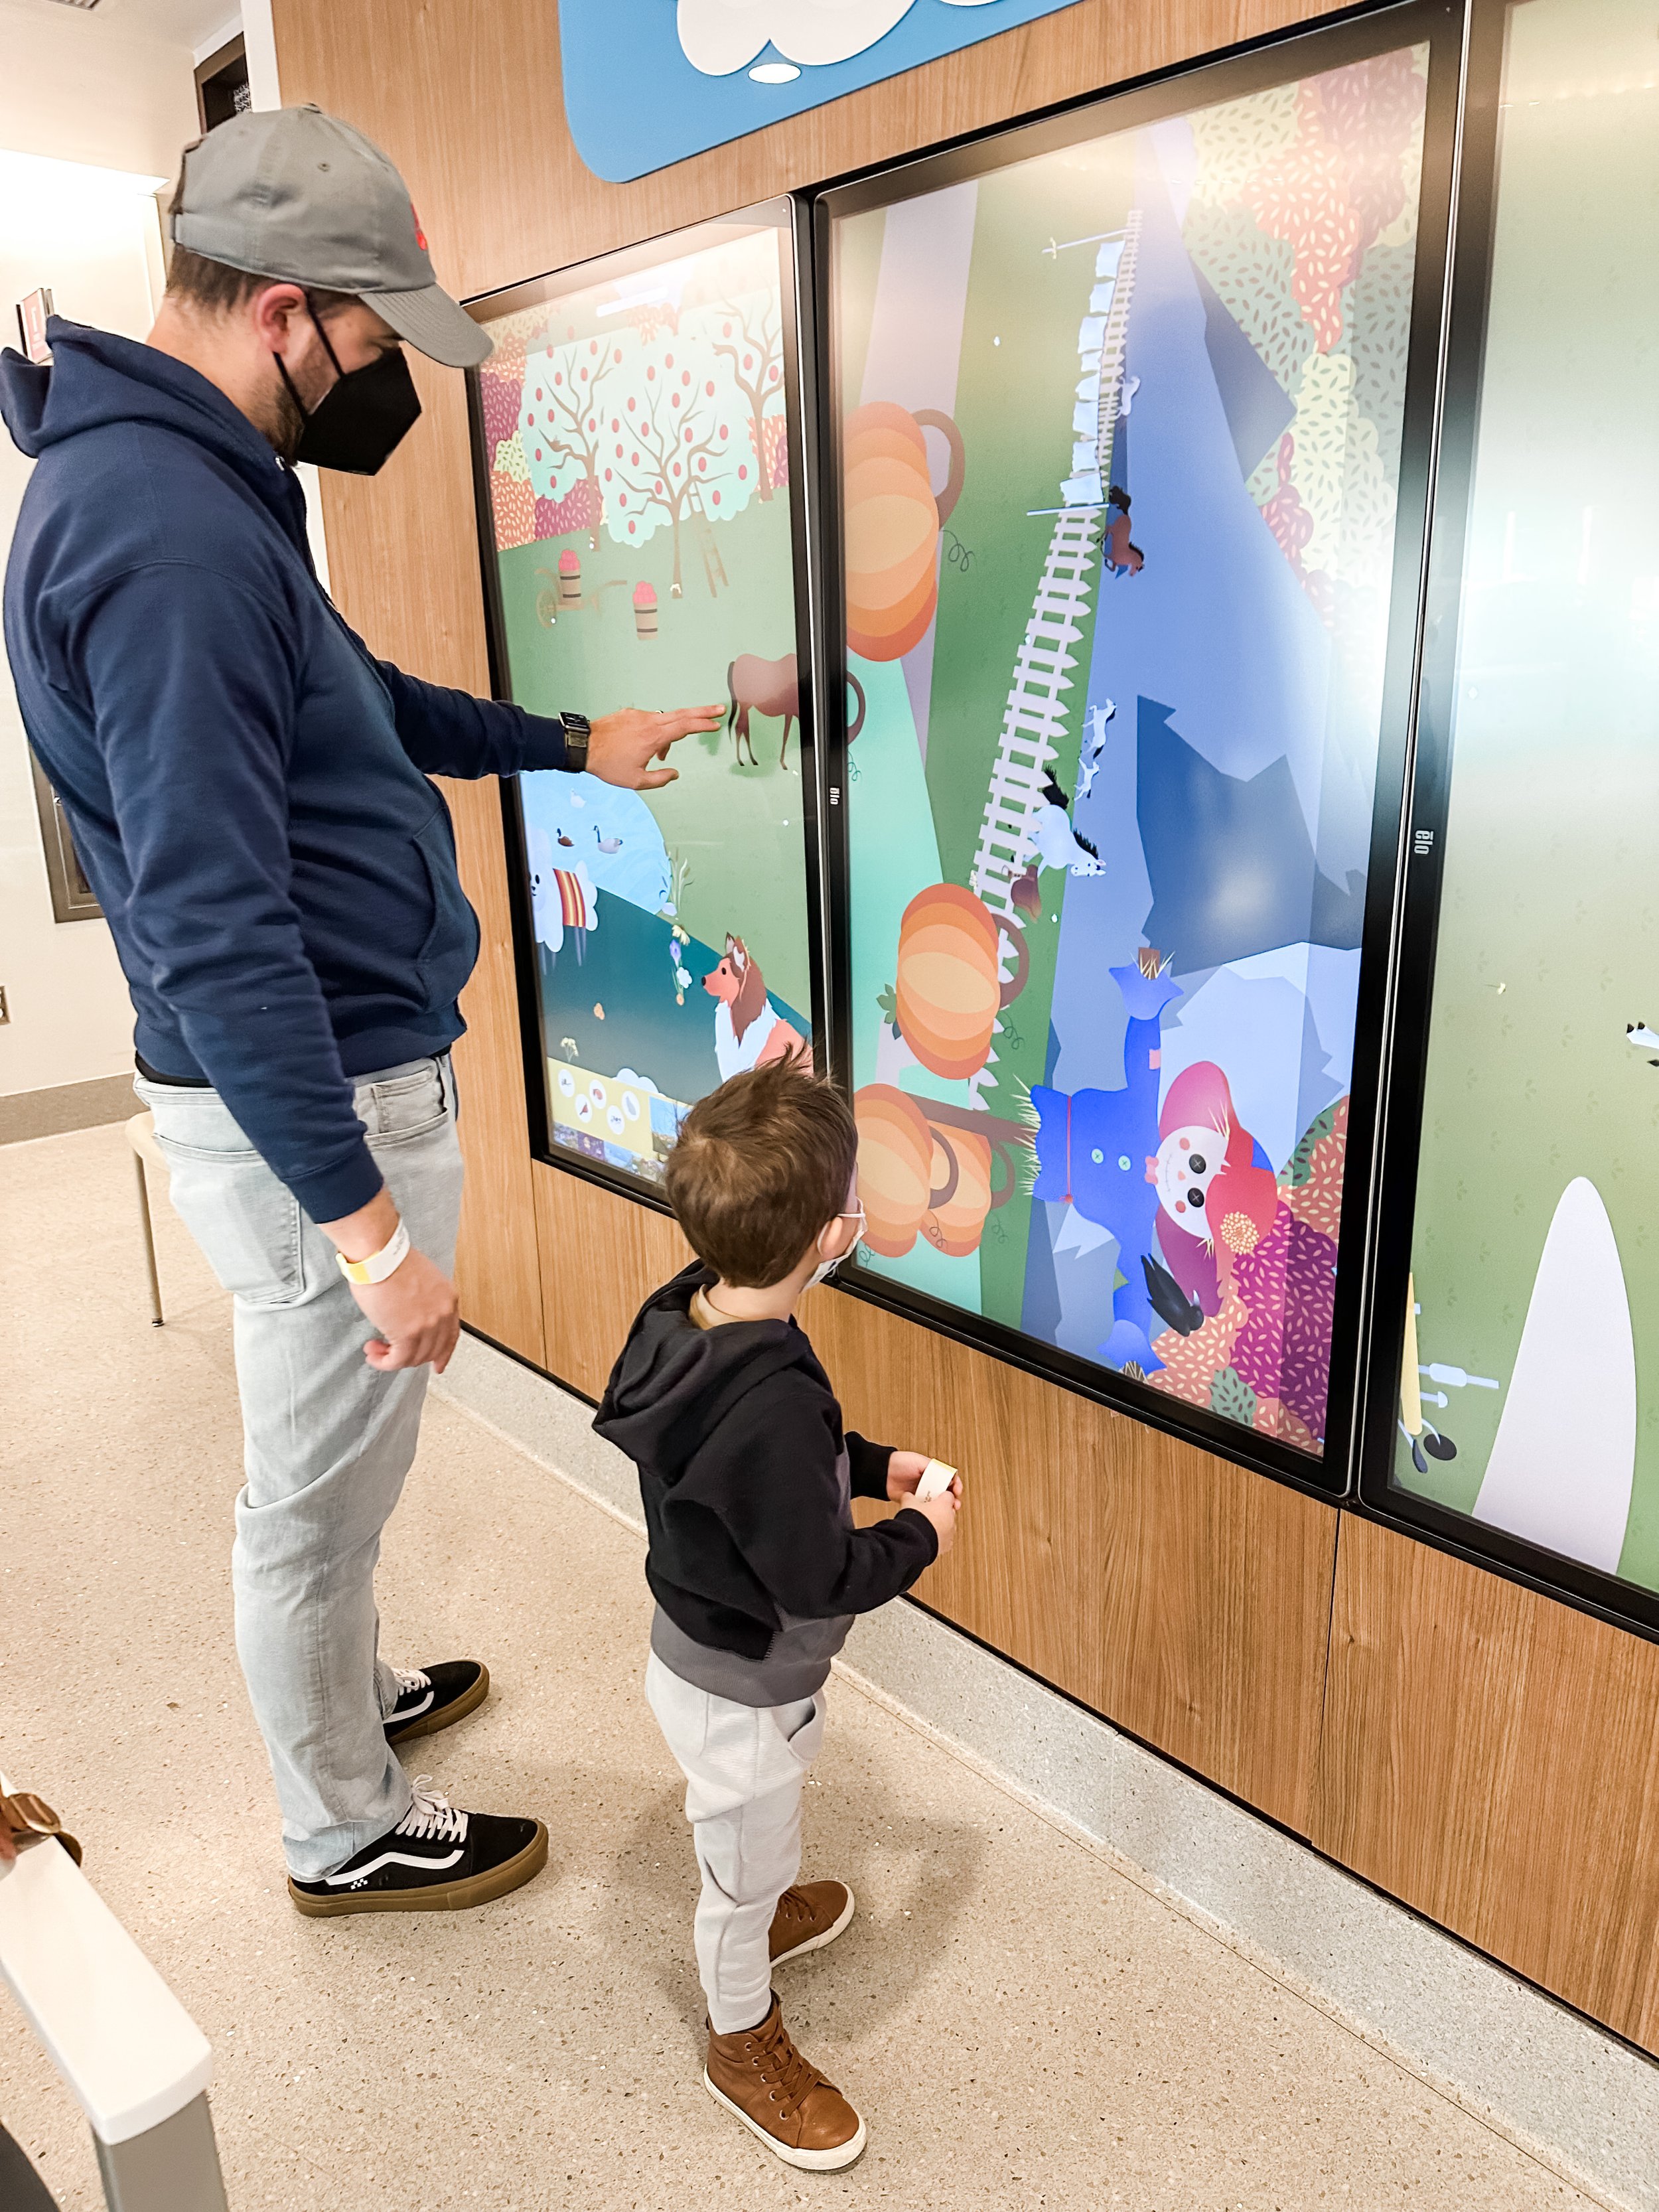  father and son looking at touchscreen tvs in hospital waiting room 